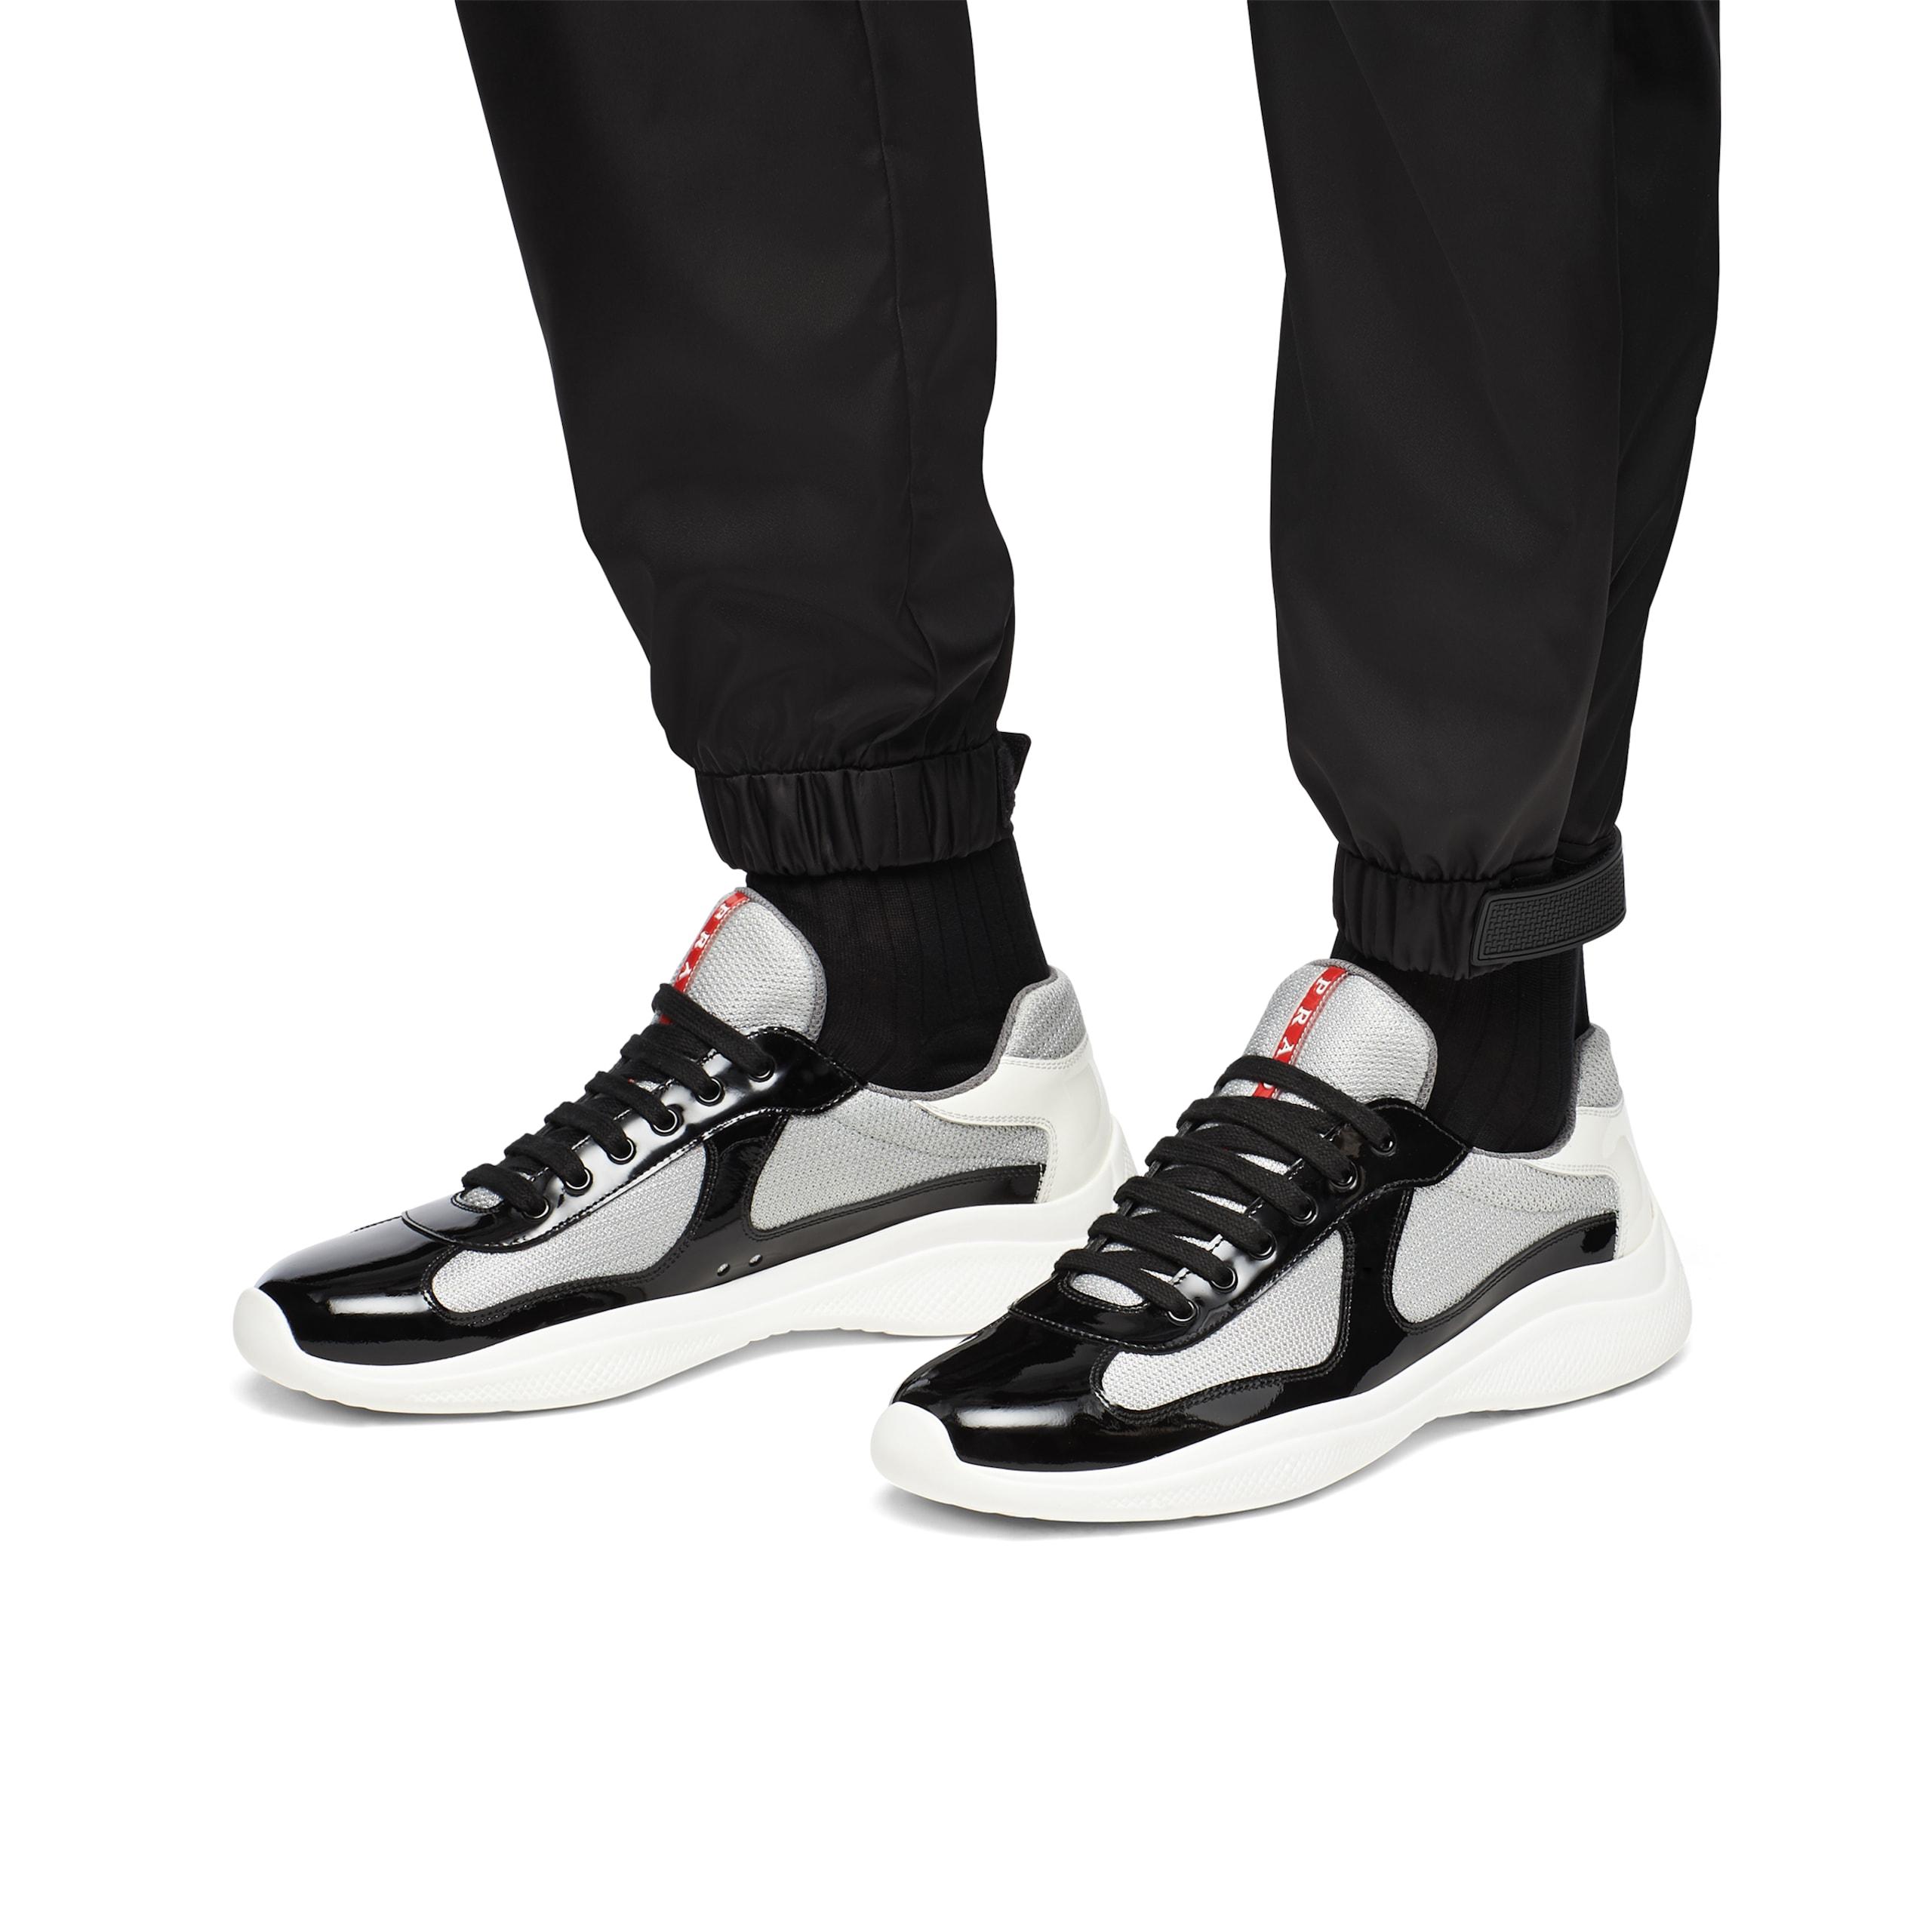 patent leather and technical fabric sneakers